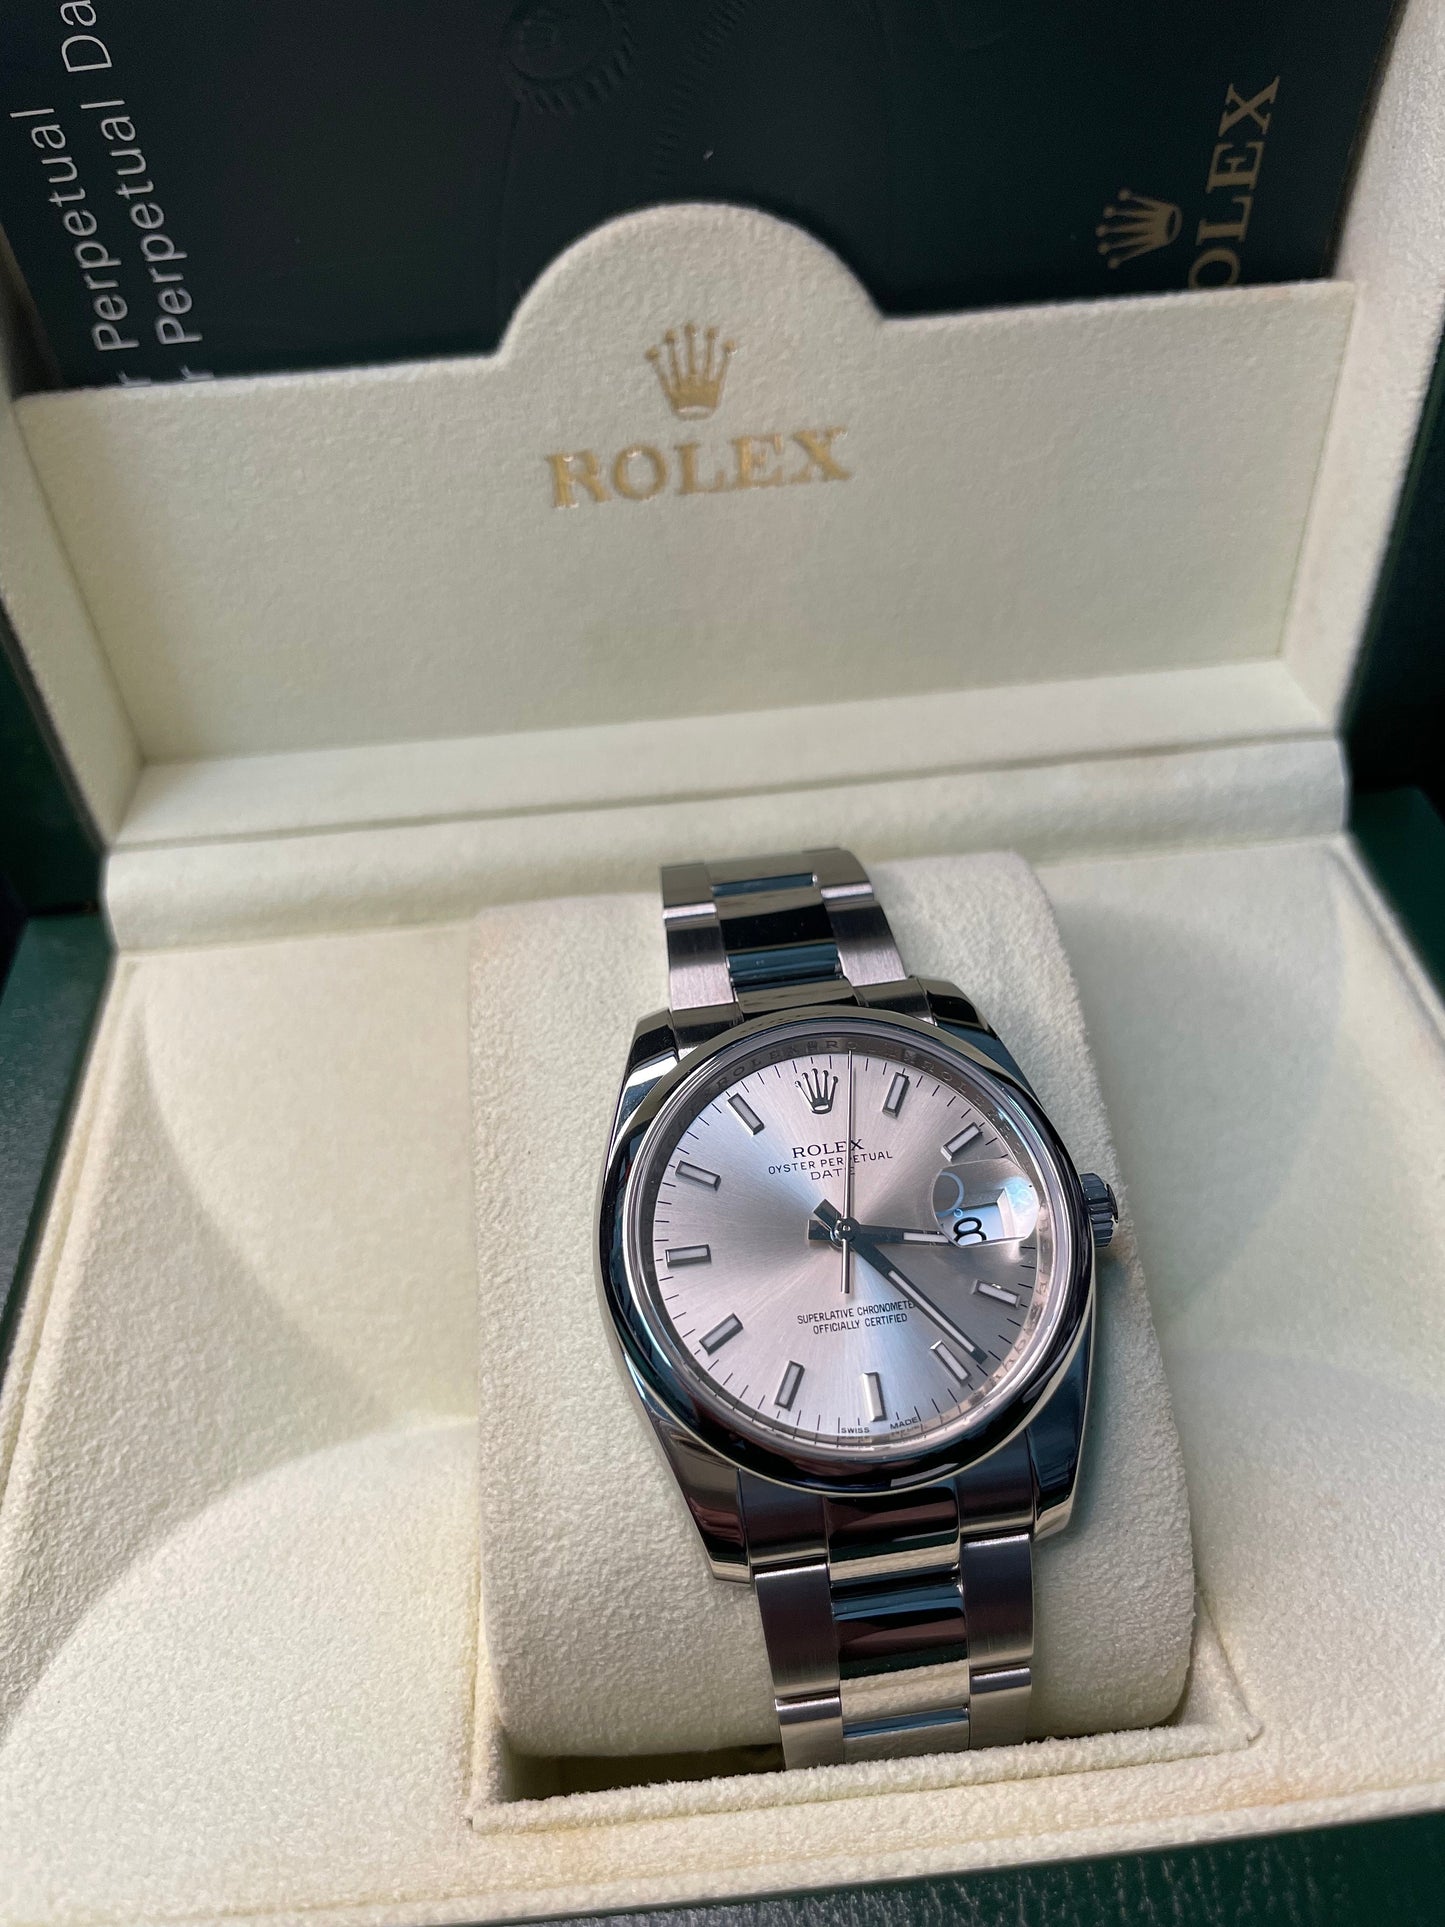 Rolex Oyster Perpetual Date 115270 - PM VINTAGE WATCHES - Rolex